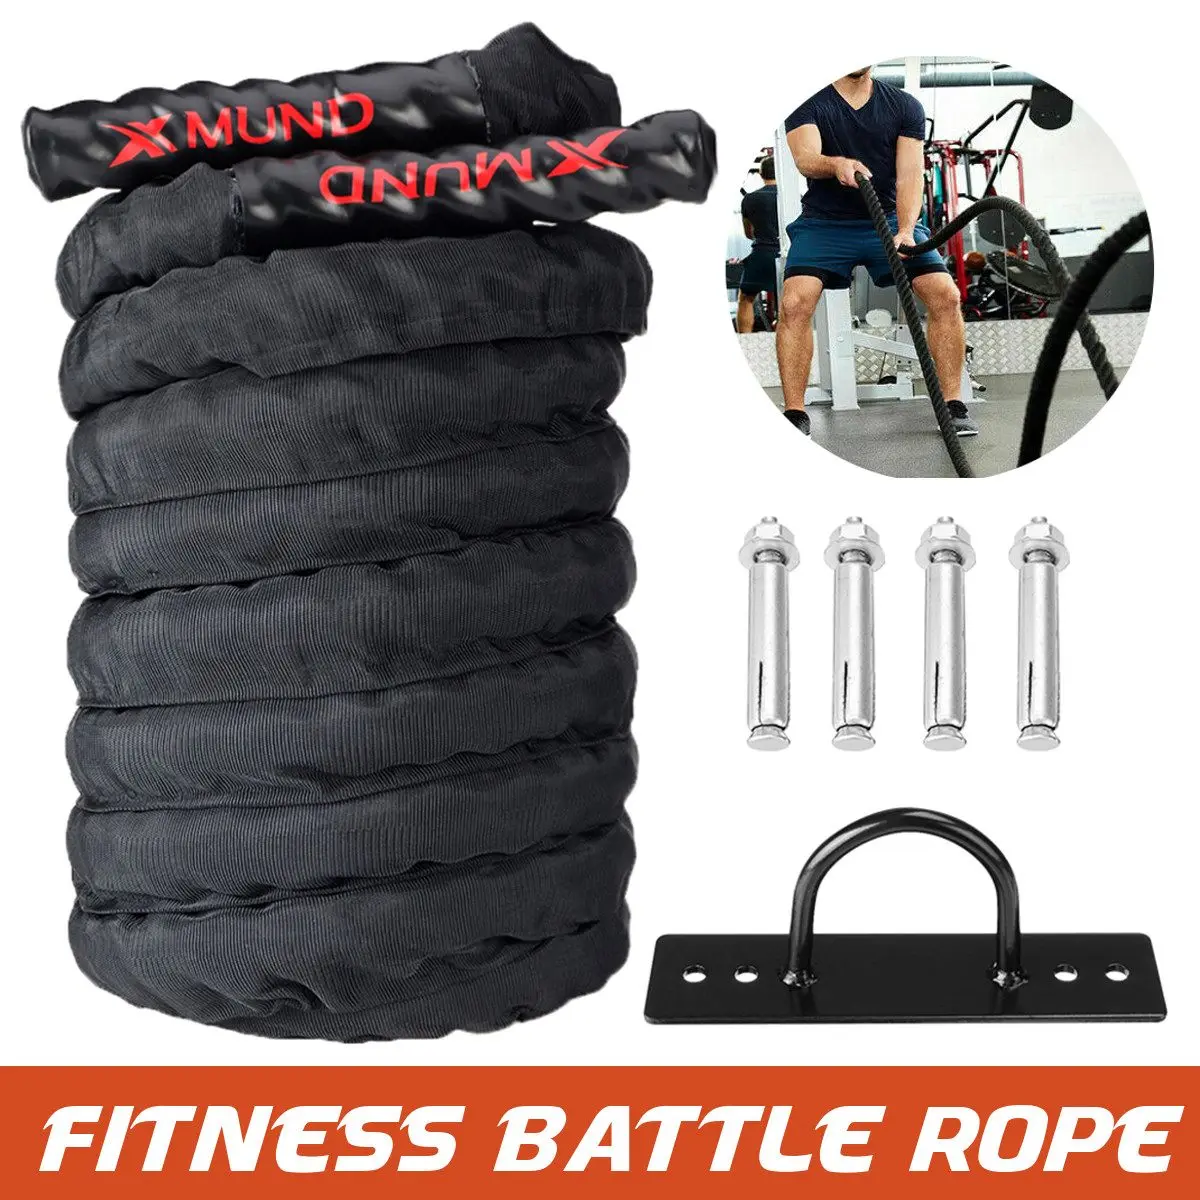 

9M Battle Rope Fitness Workout Equipment Heavy Jump Rope Weighted Battle Skipping Ropes For Power Training Improve Strength